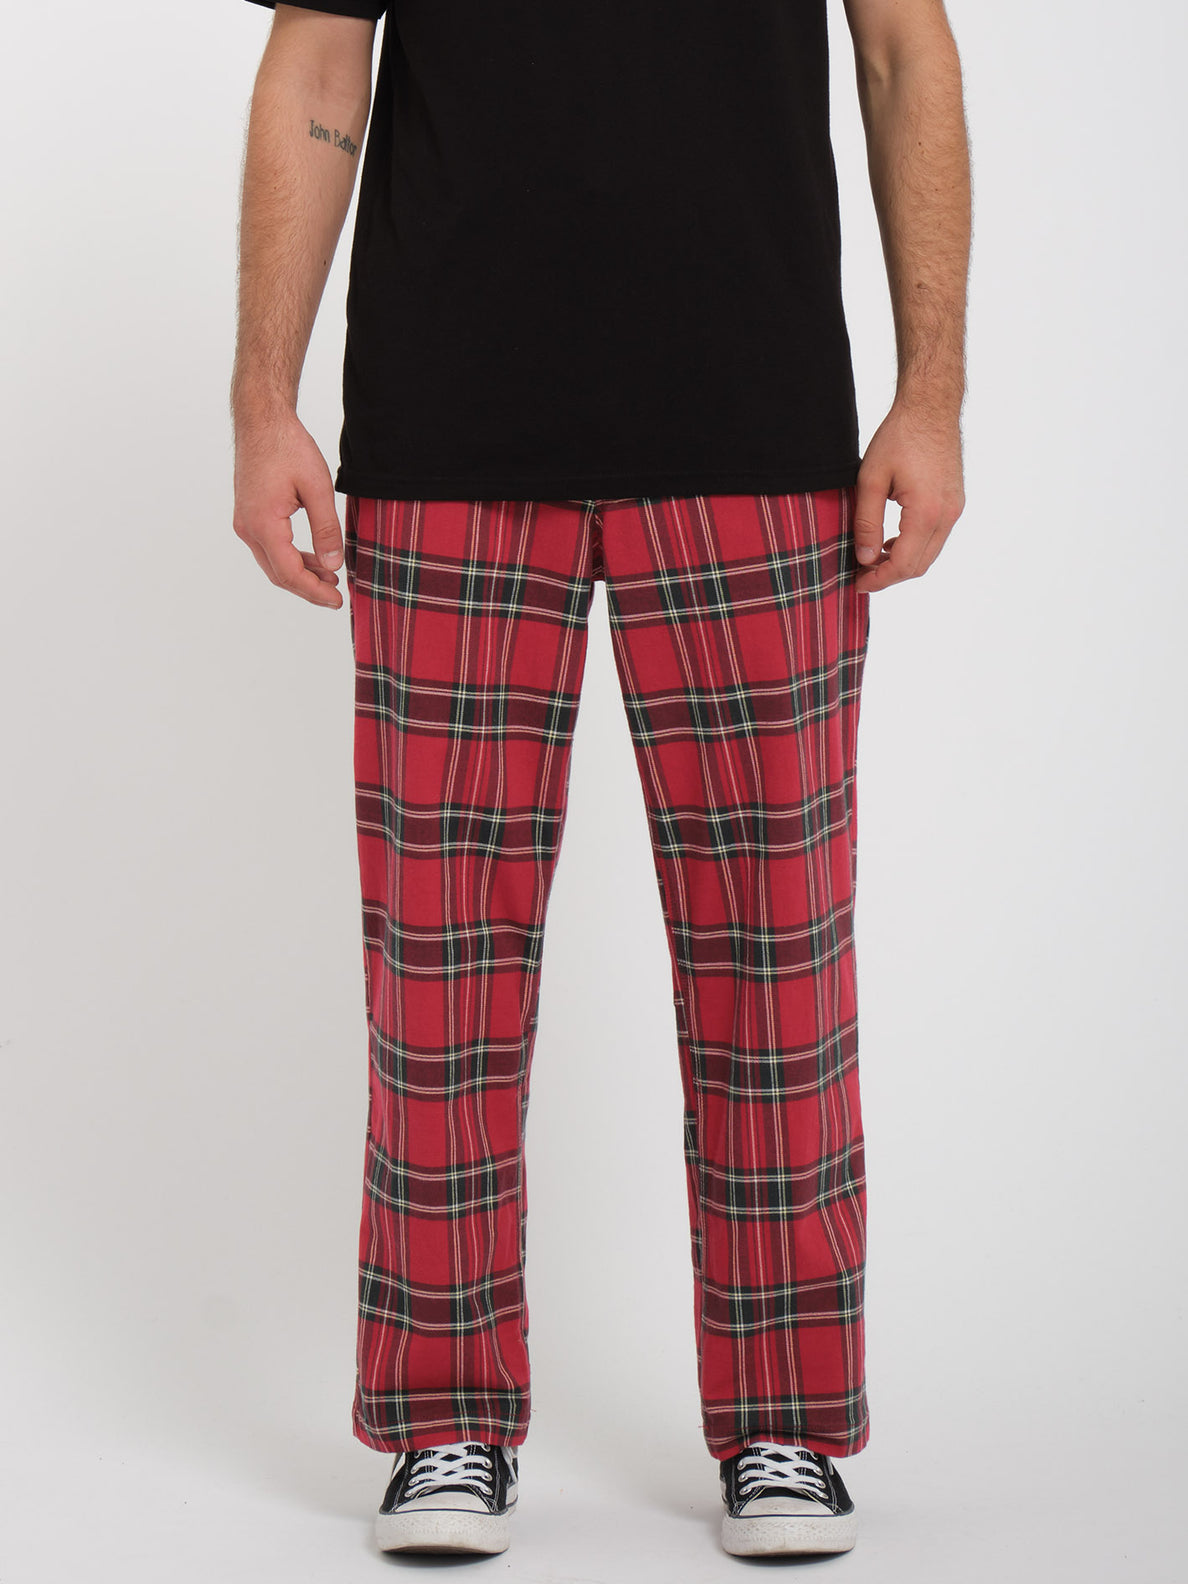 The Comeback of Plaid Trousers this summer season. Plaids all the way. |  Mens outfits, Plaid pants outfit, Plaid pants men outfit